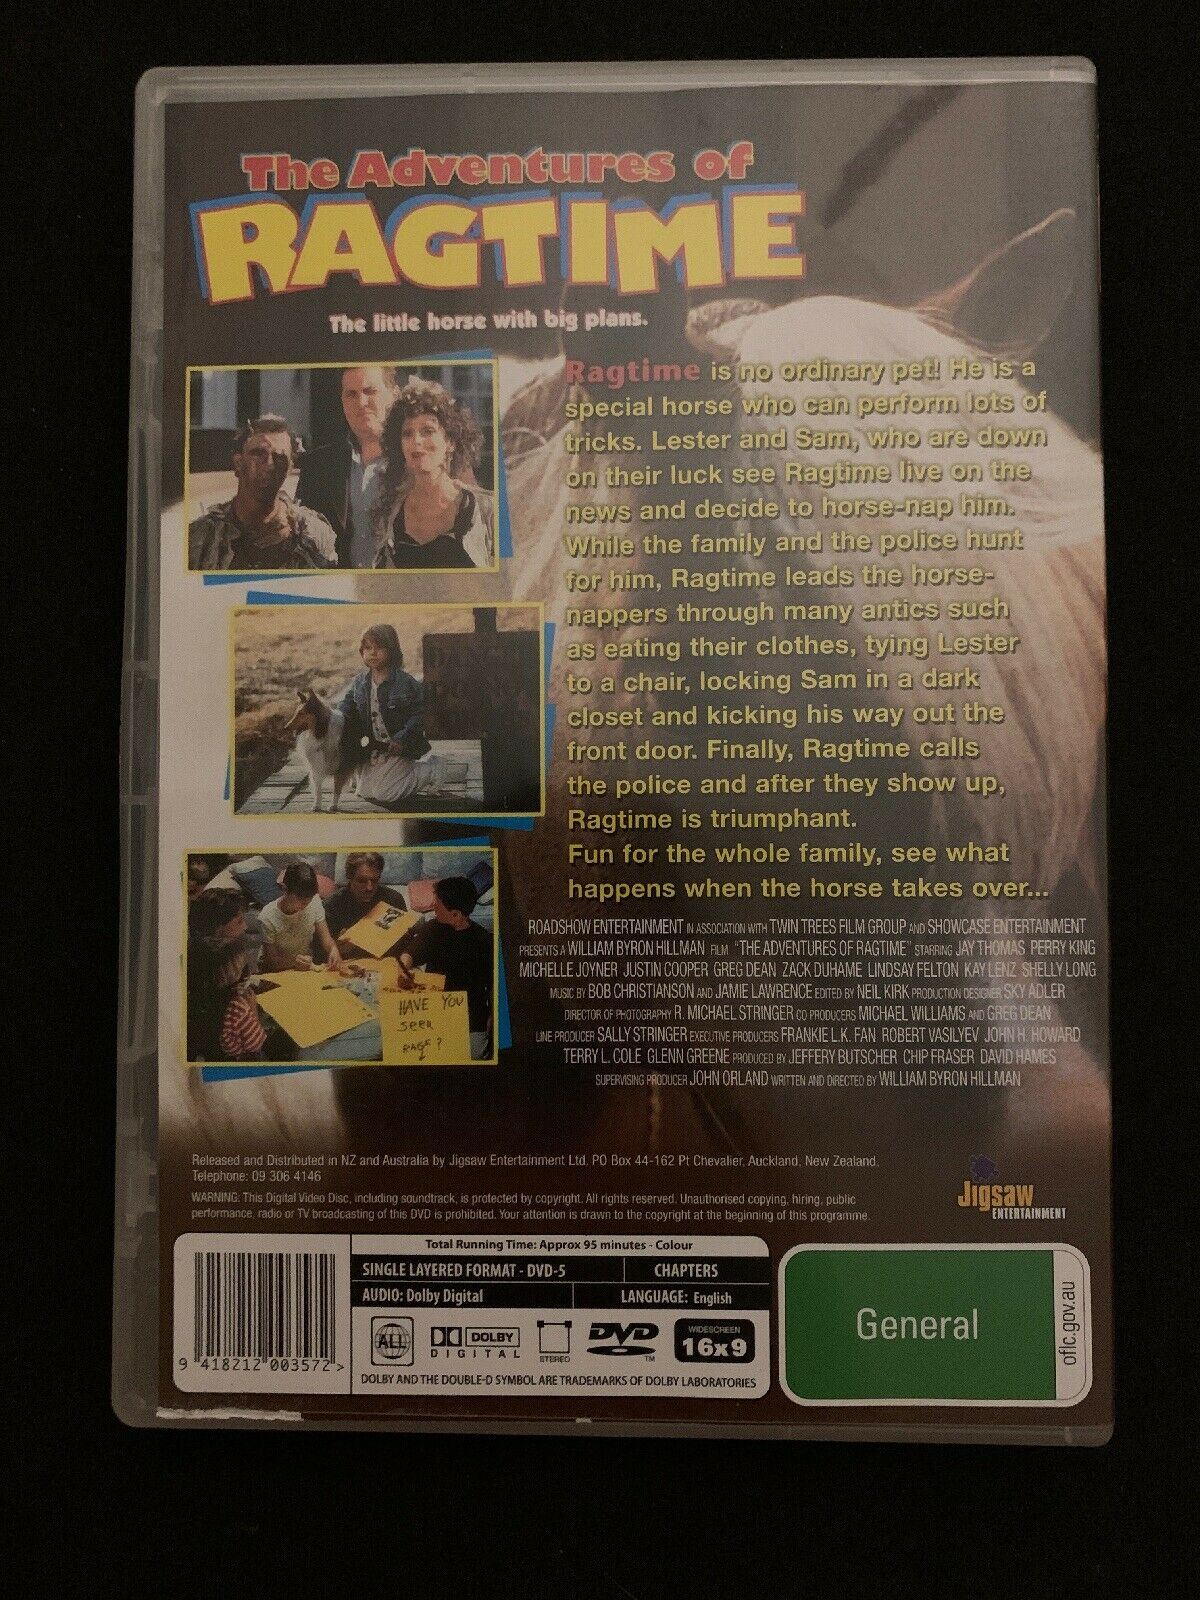 The Adventures Of RAGTIME (DVD) Rare Horse Movie - Region Free